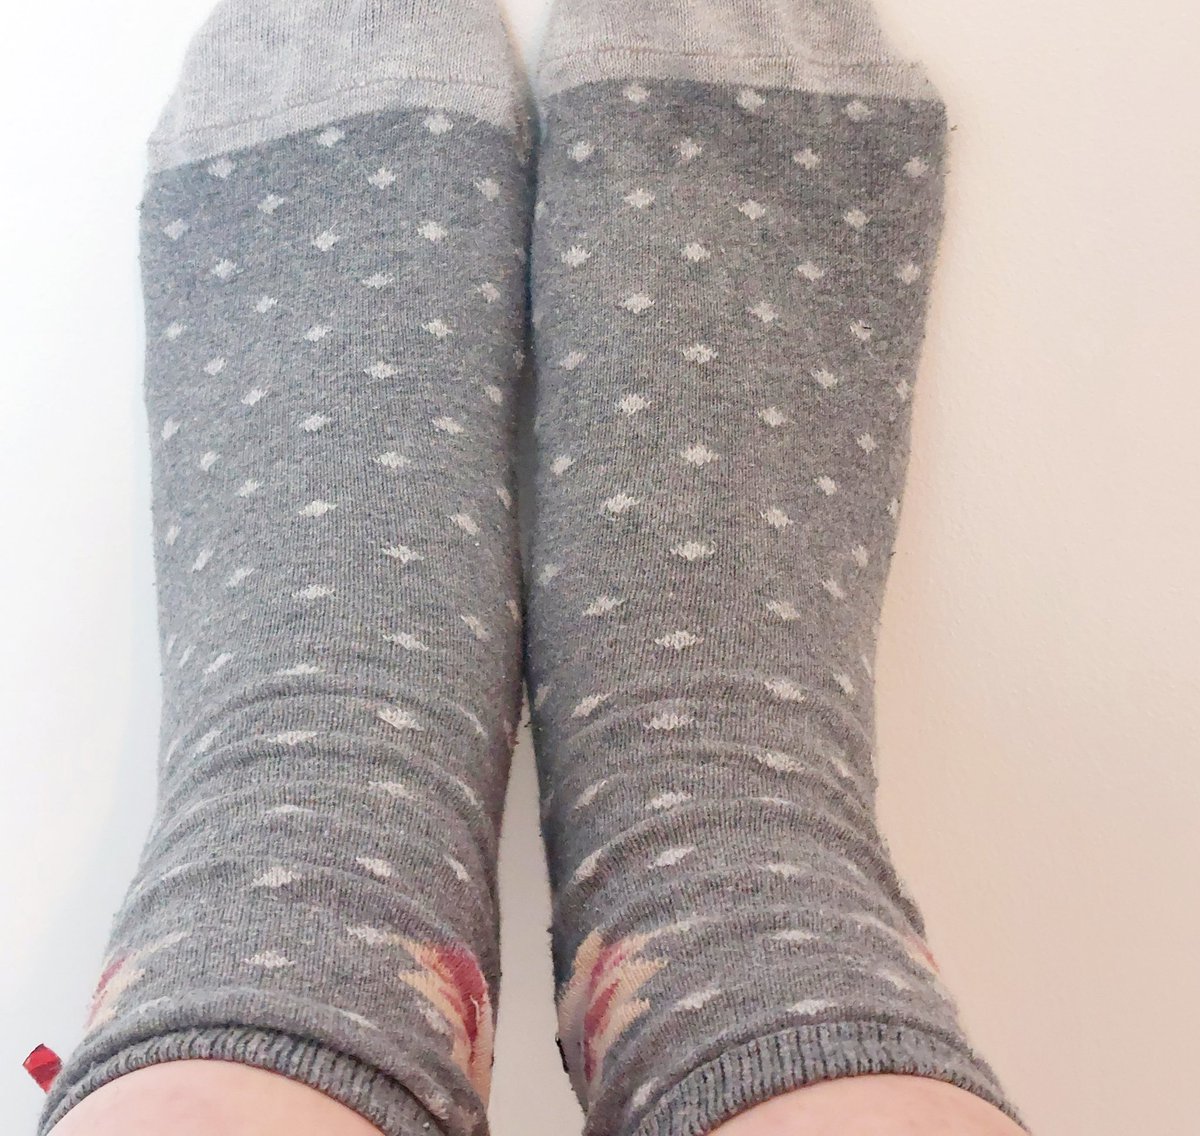 Today is #LynchSyndromeAwarenessDay! #LetsGoDotty for Lynch syndrome. LS is an inherited condition increases lifetime risk of spectrum of cancers, including bowel and womb. Find out more about the condition in the video below. 
(Don't have many dotty items, but have these socks!)